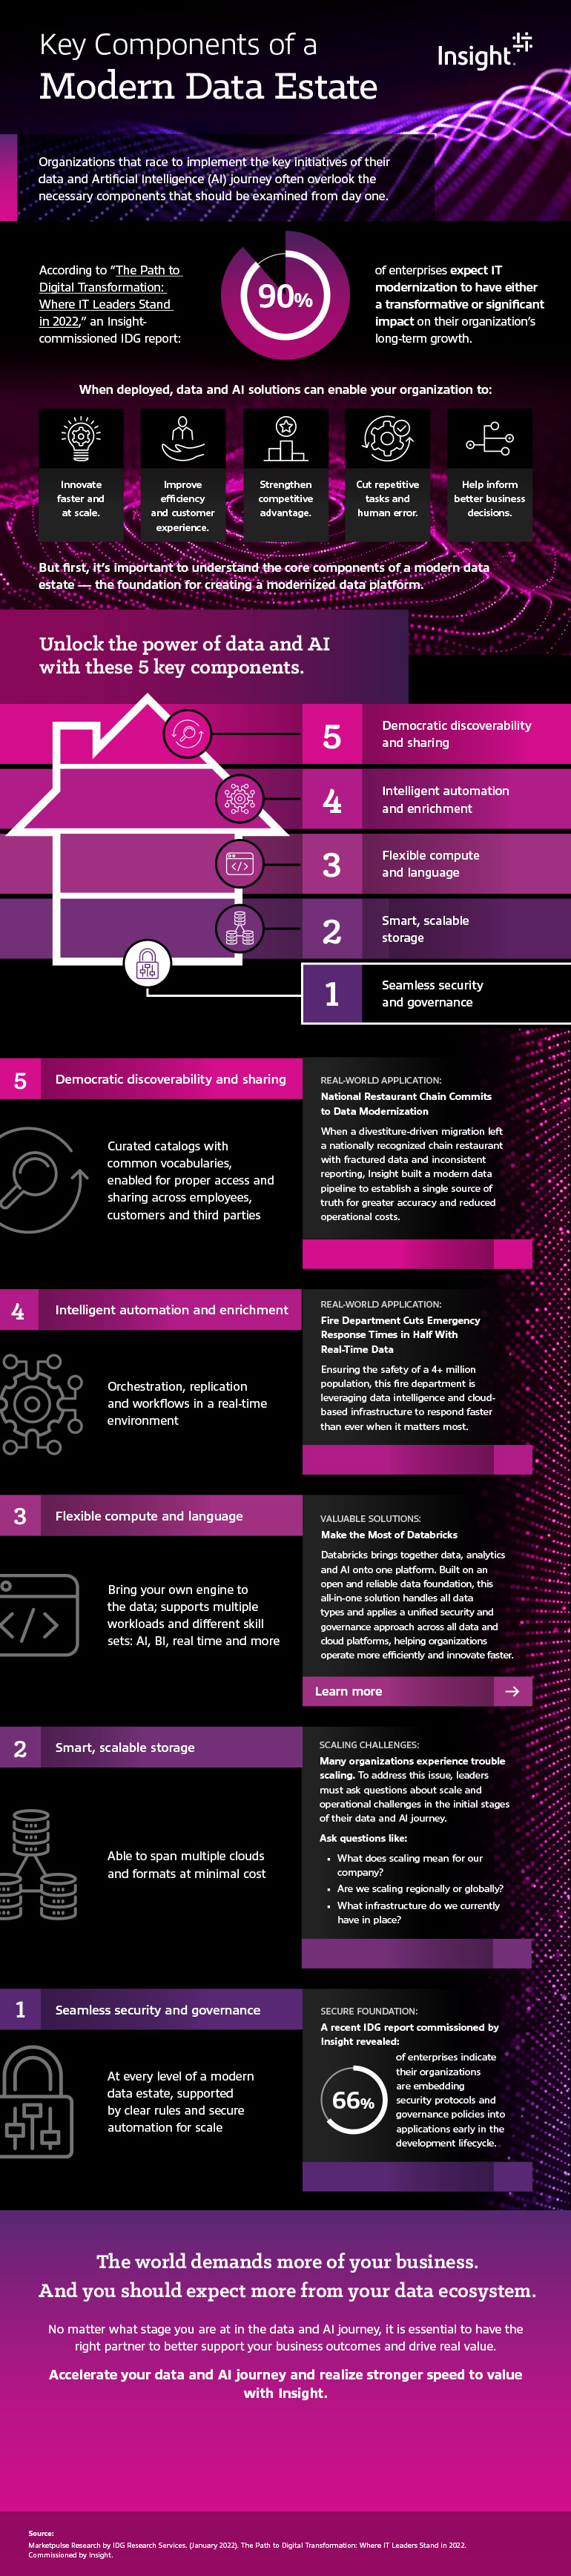 Key Components of a Modern Data Estate infographic